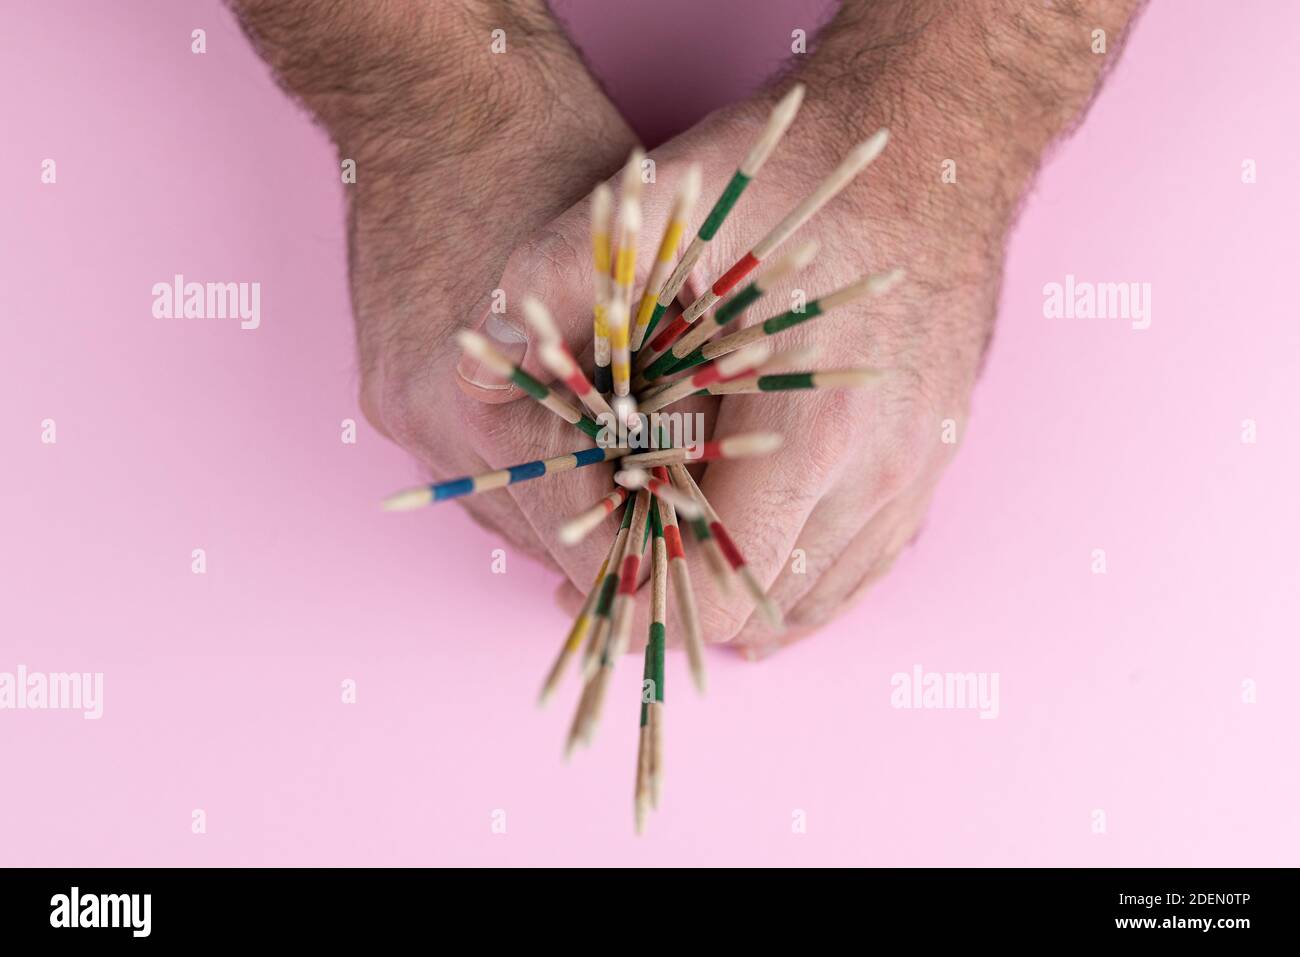 top view of hands holding mikado pick-up sticks against pink background Stock Photo